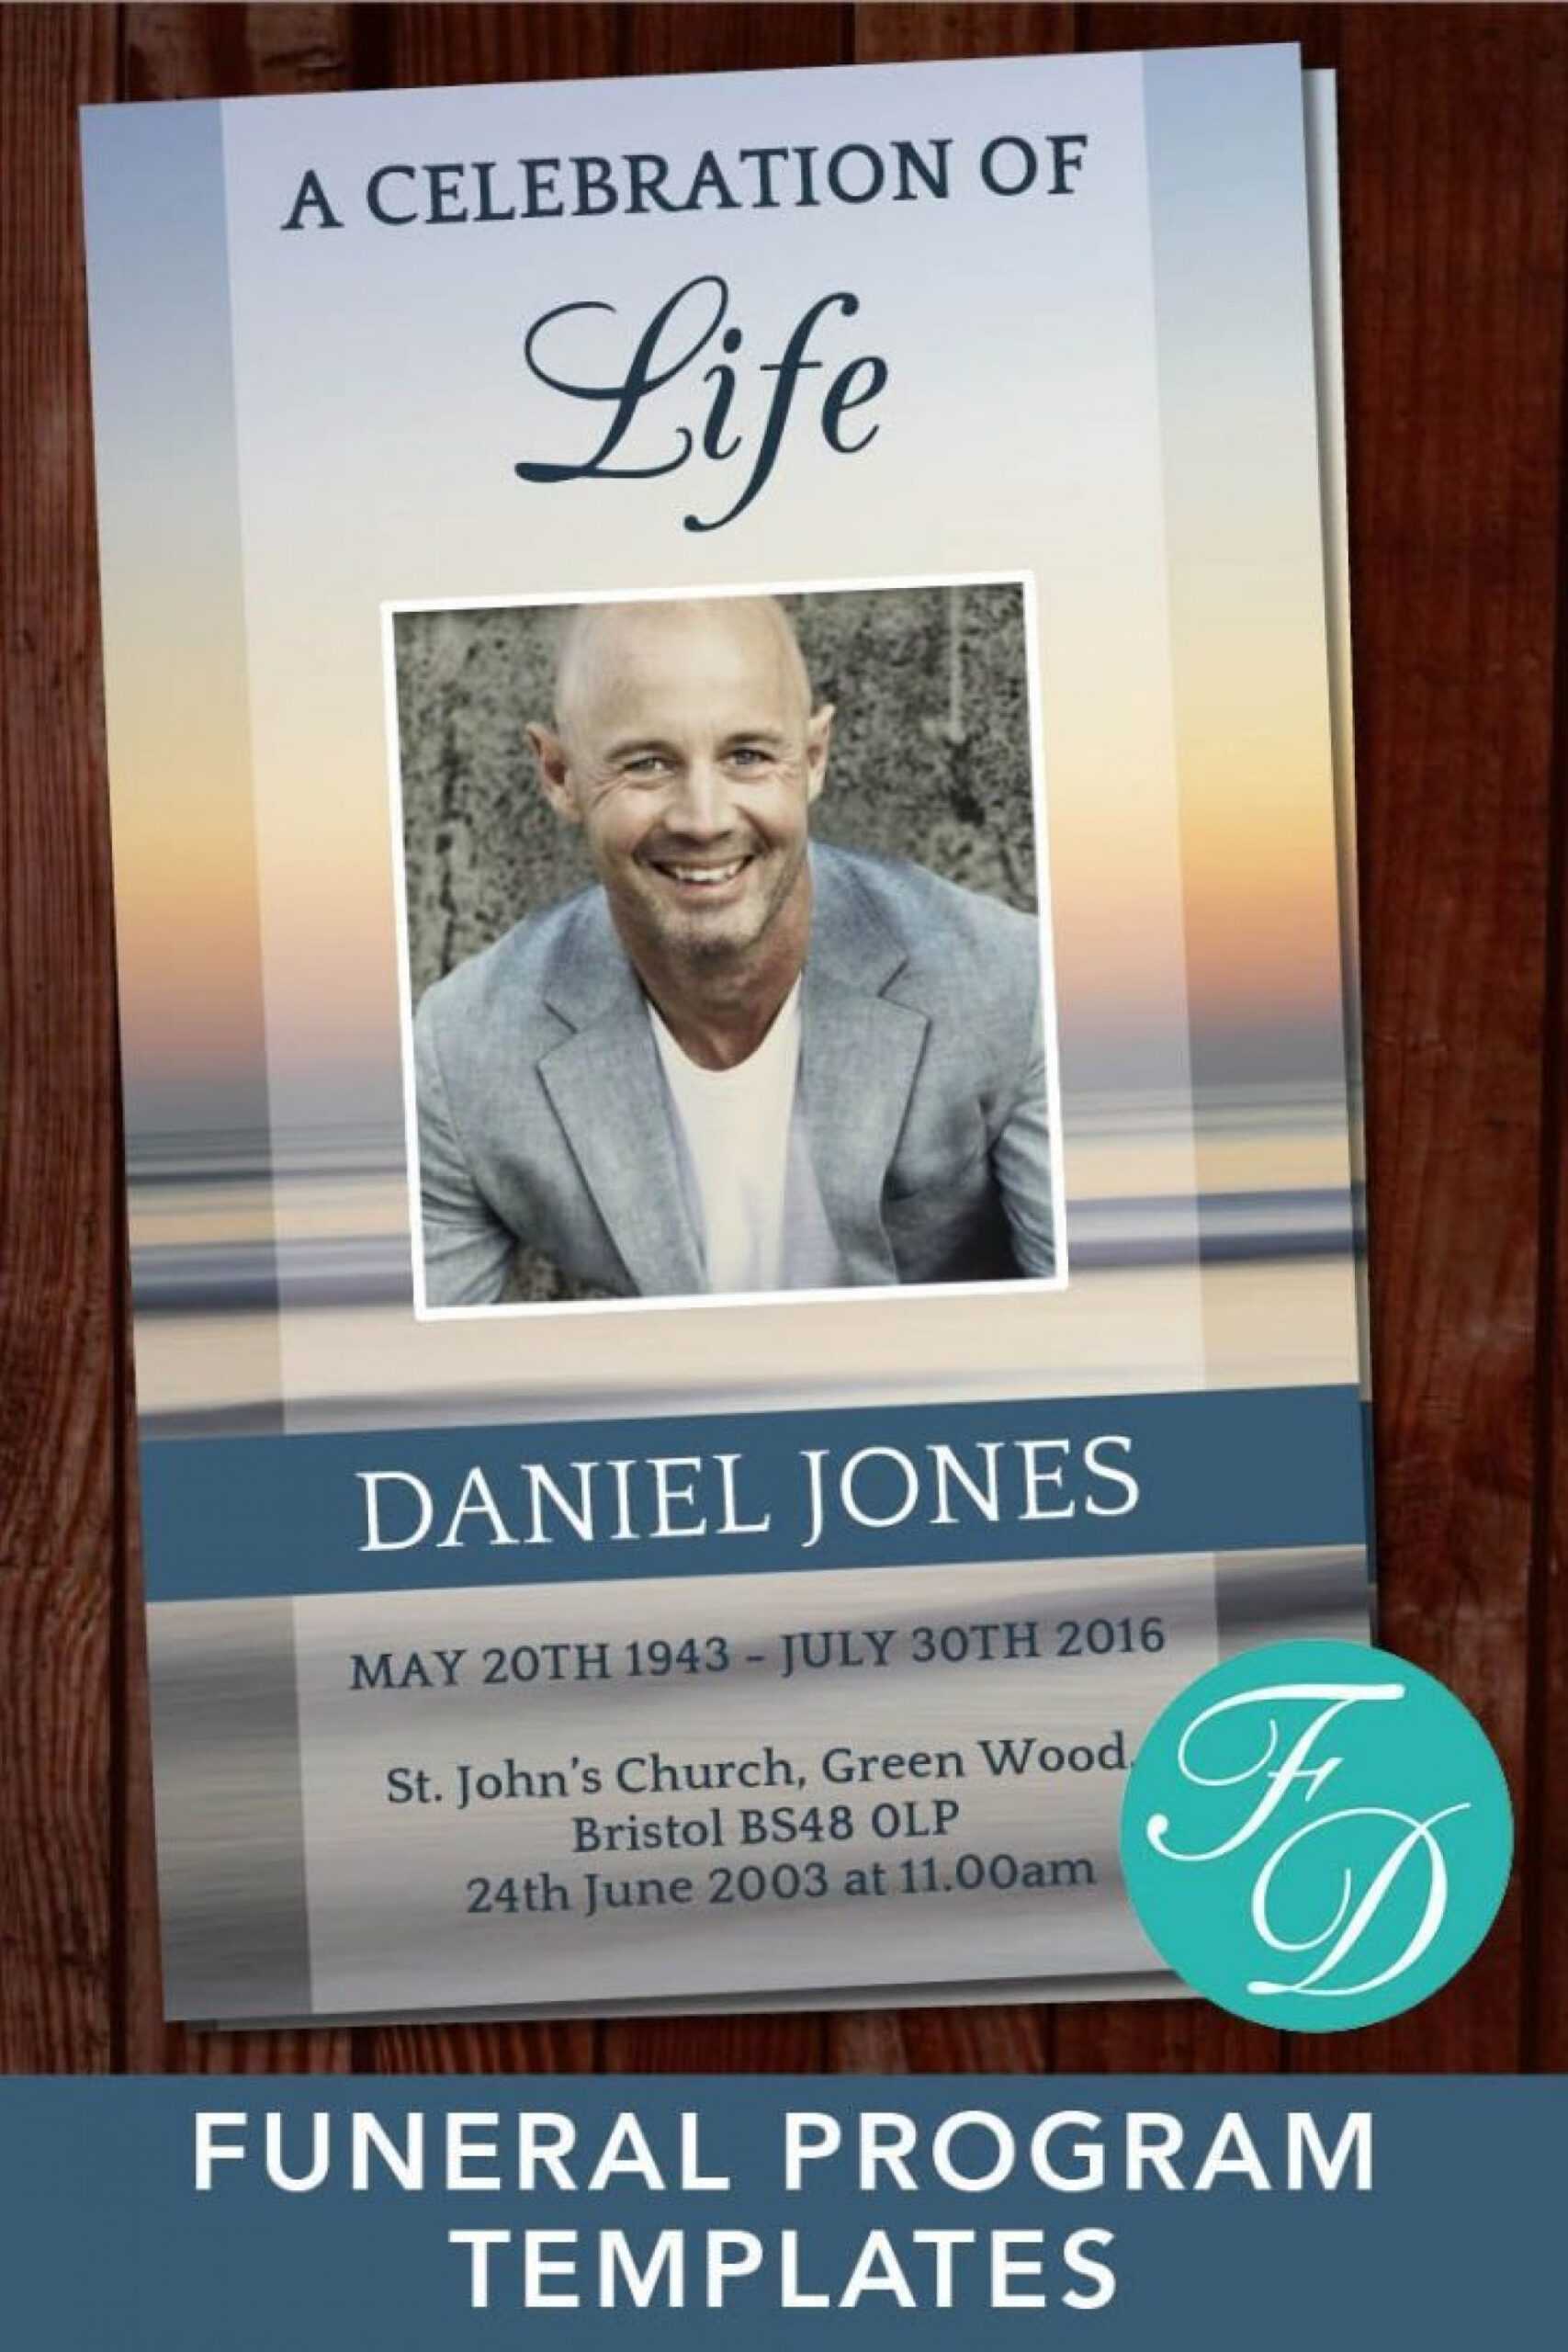 003 Celebration Of Life Template Ideas In Memoriam Cards In Funeral Slideshow Template